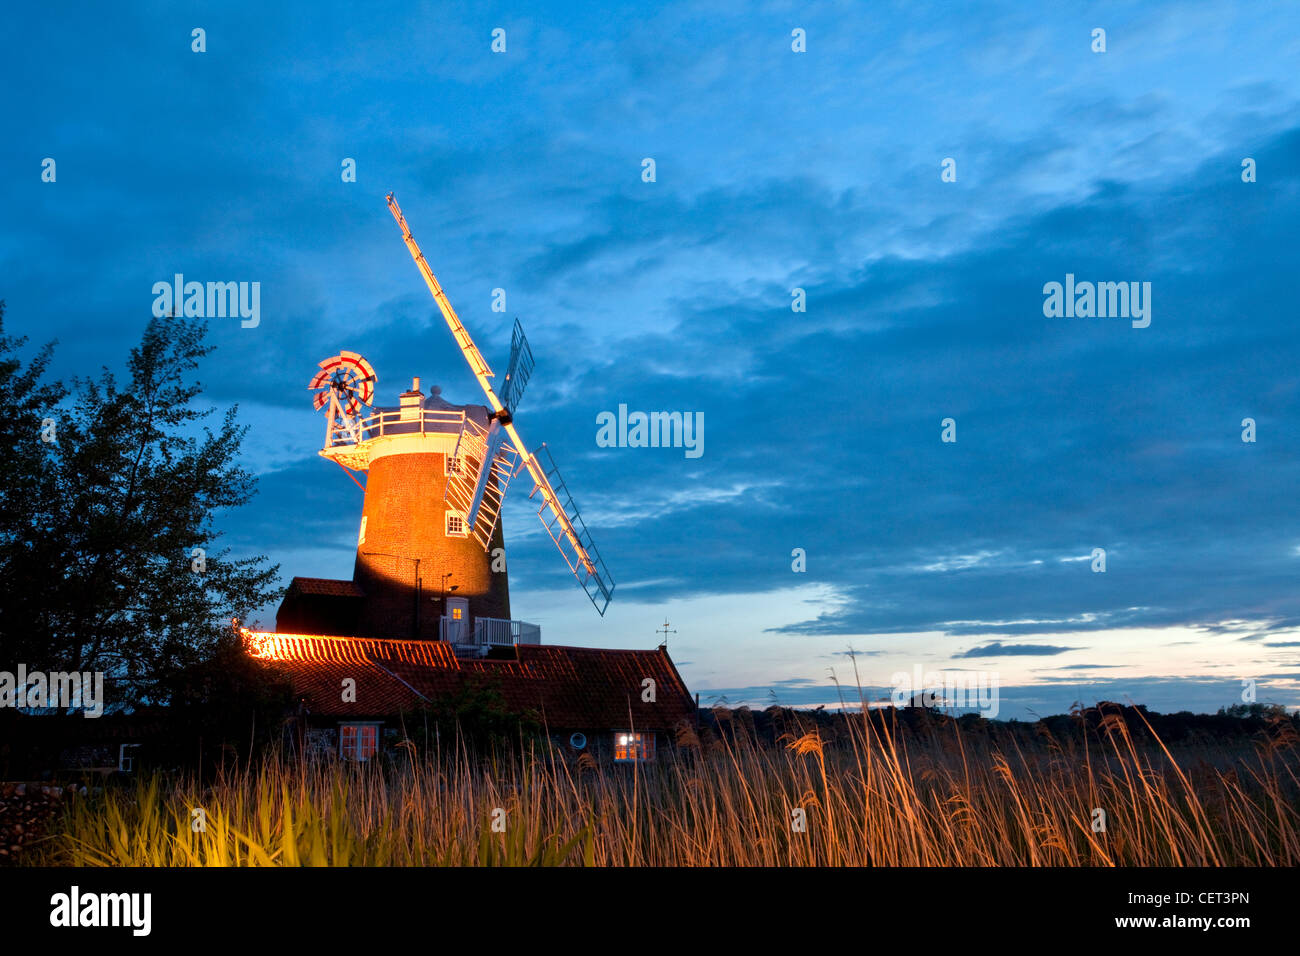 Cley windmill, a grade ll listed tower mill originally built in the early 19th century, illuminated at night. The windmill has b Stock Photo